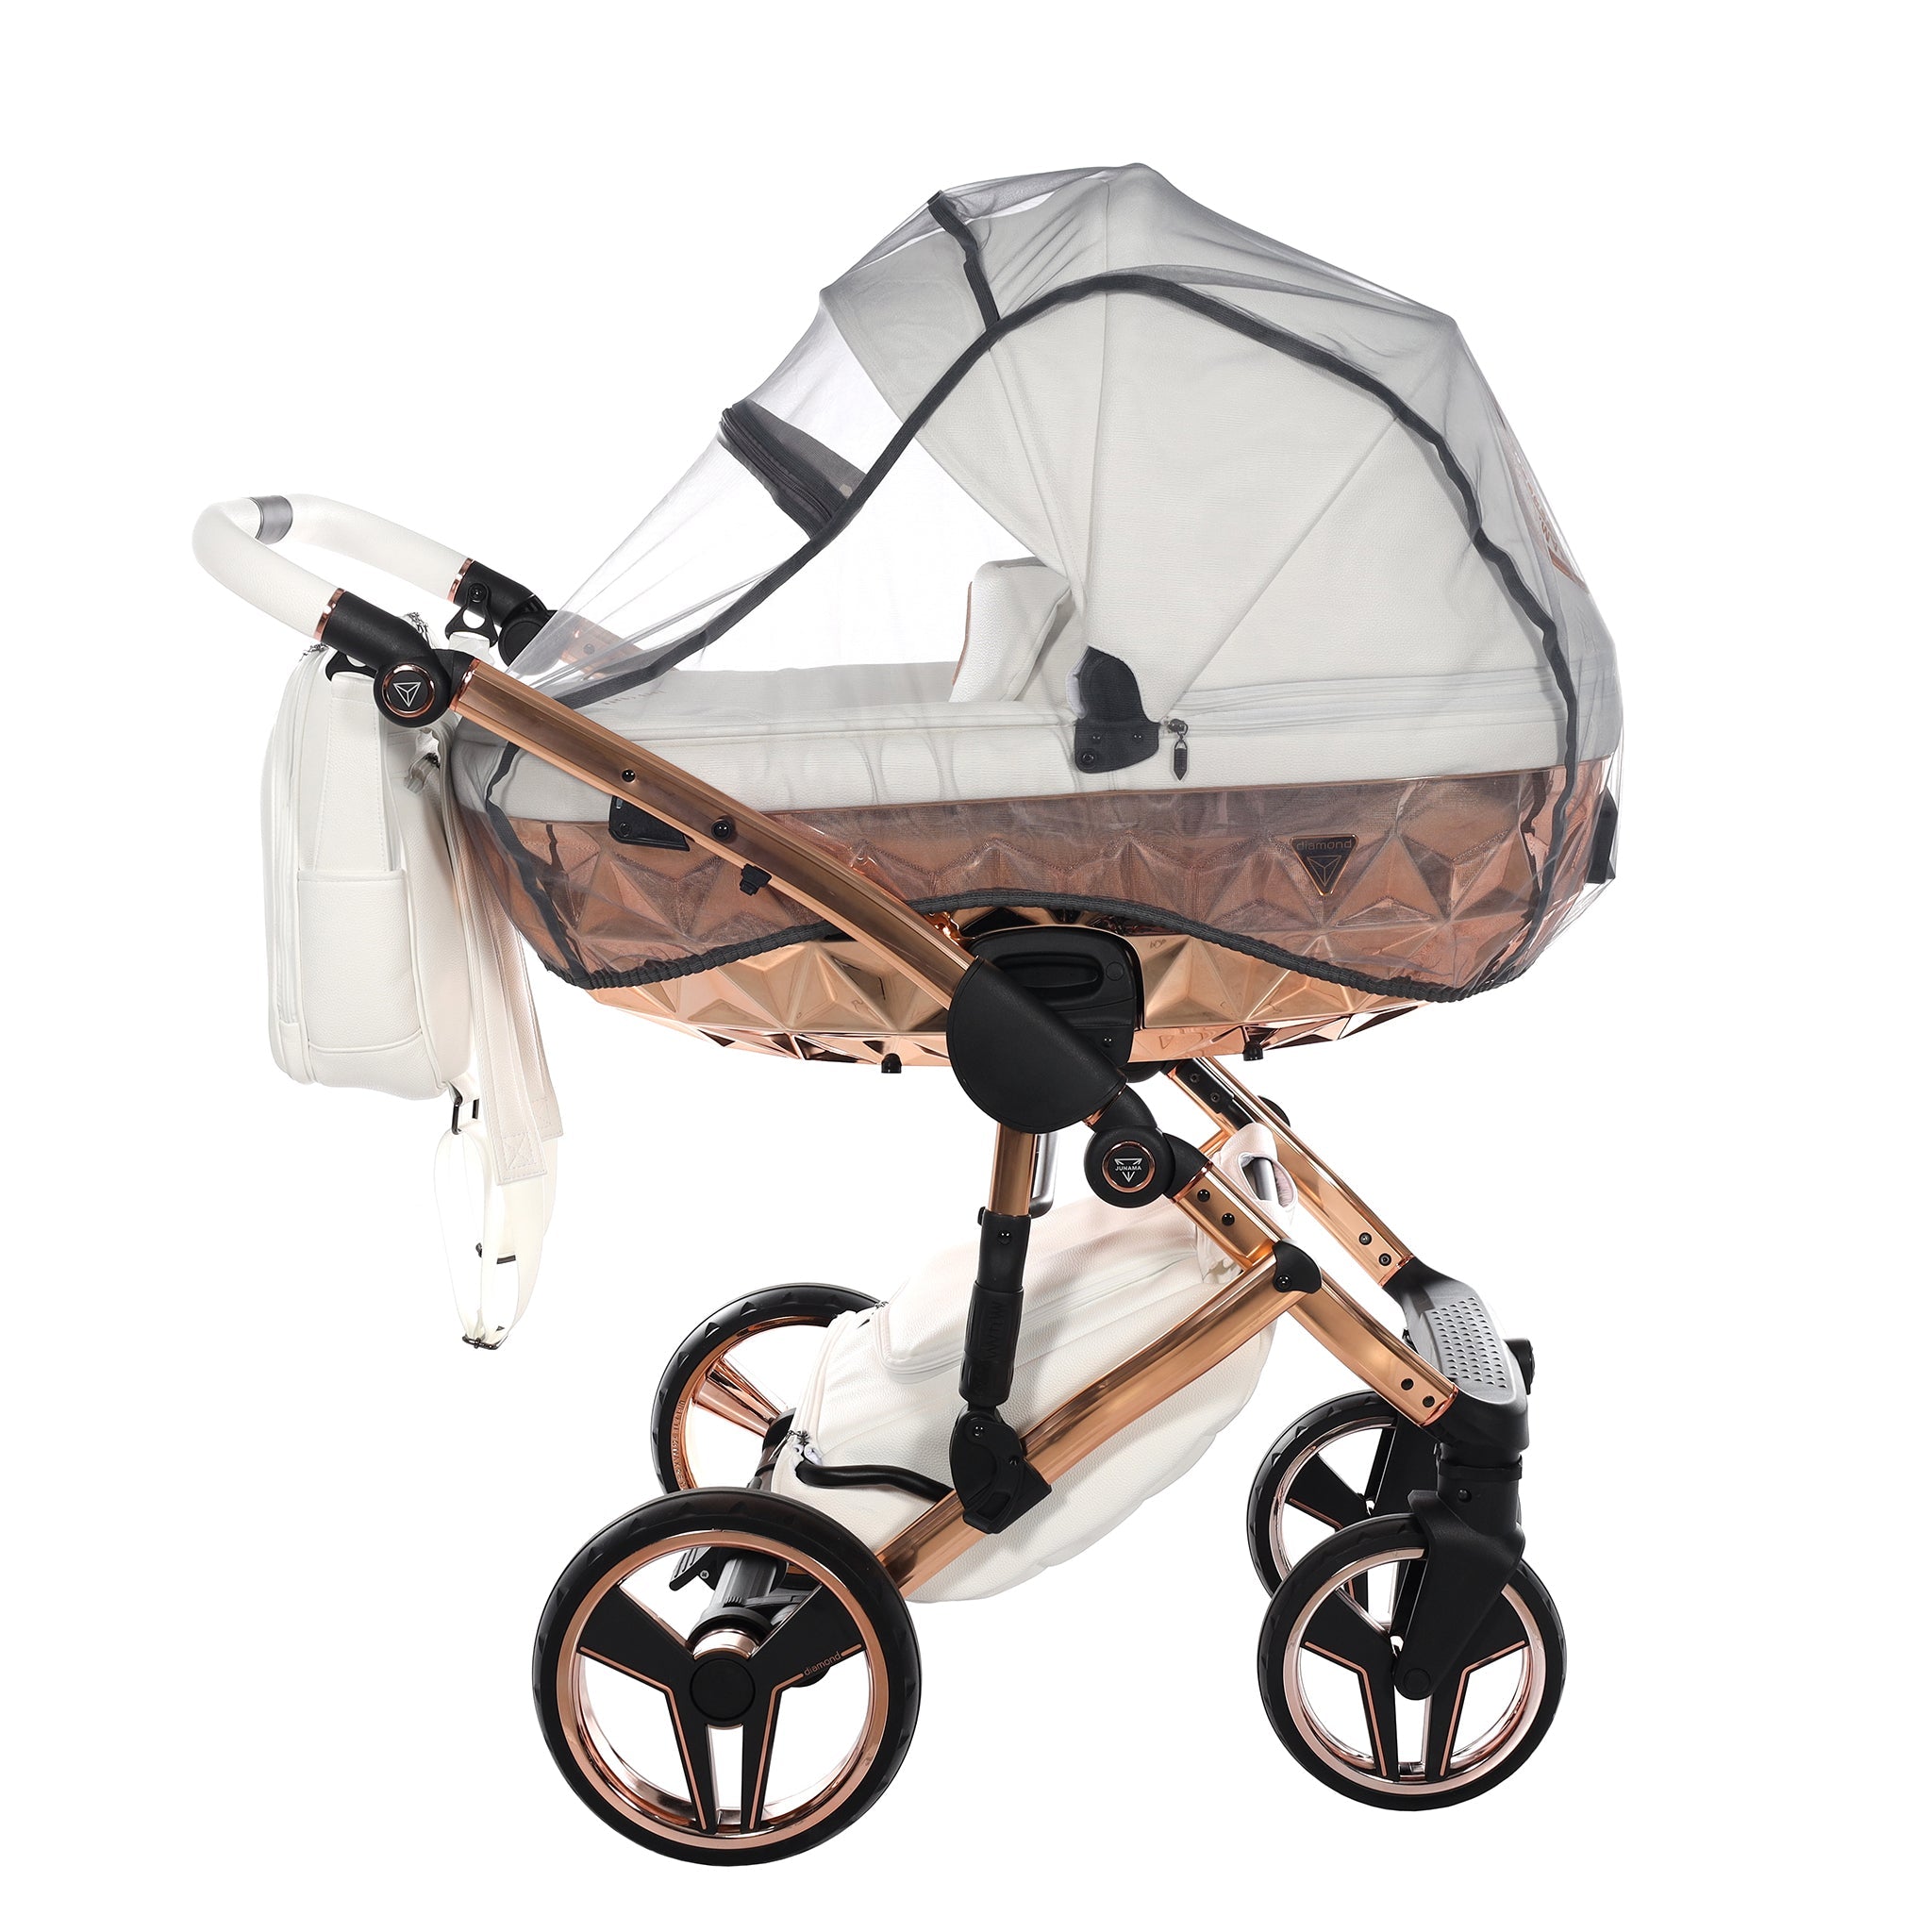 Junama Handcraft, baby prams or stroller 2 in 1 - White and Copper, number: JUNHC09